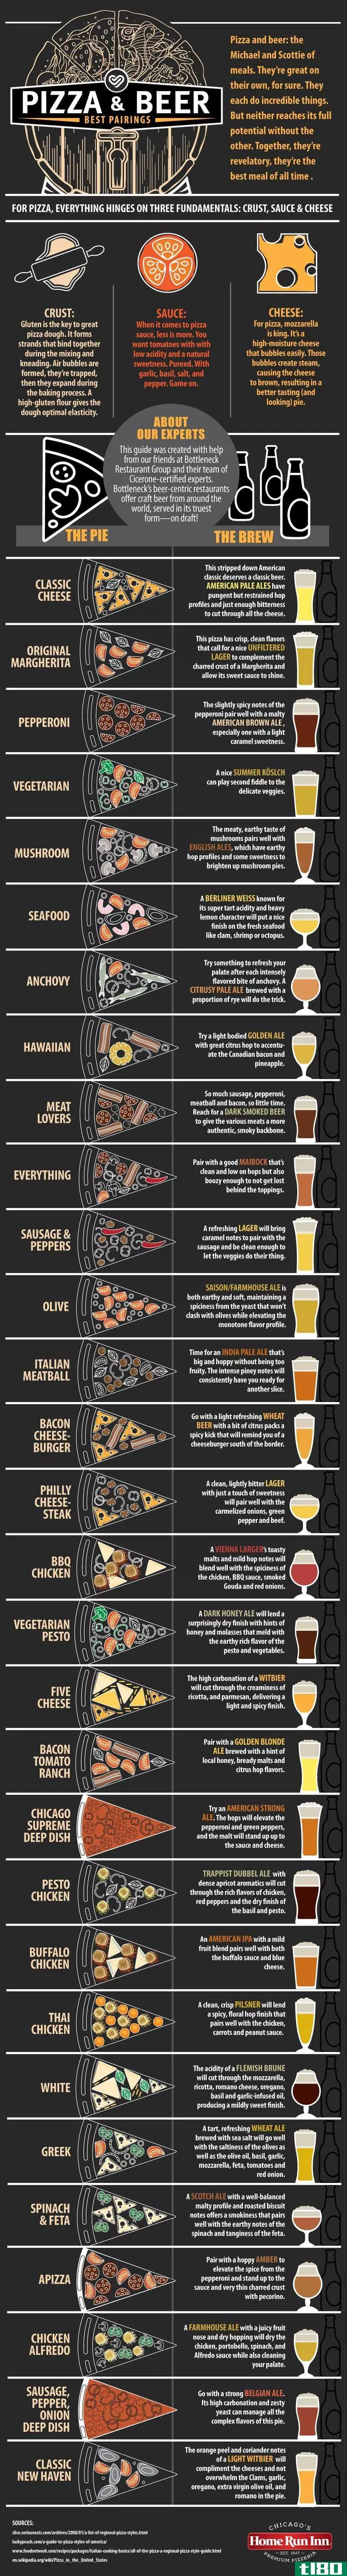 Illustration for article titled Find the Perfect Beer Pairing for Your Pizza With This Visual Guide